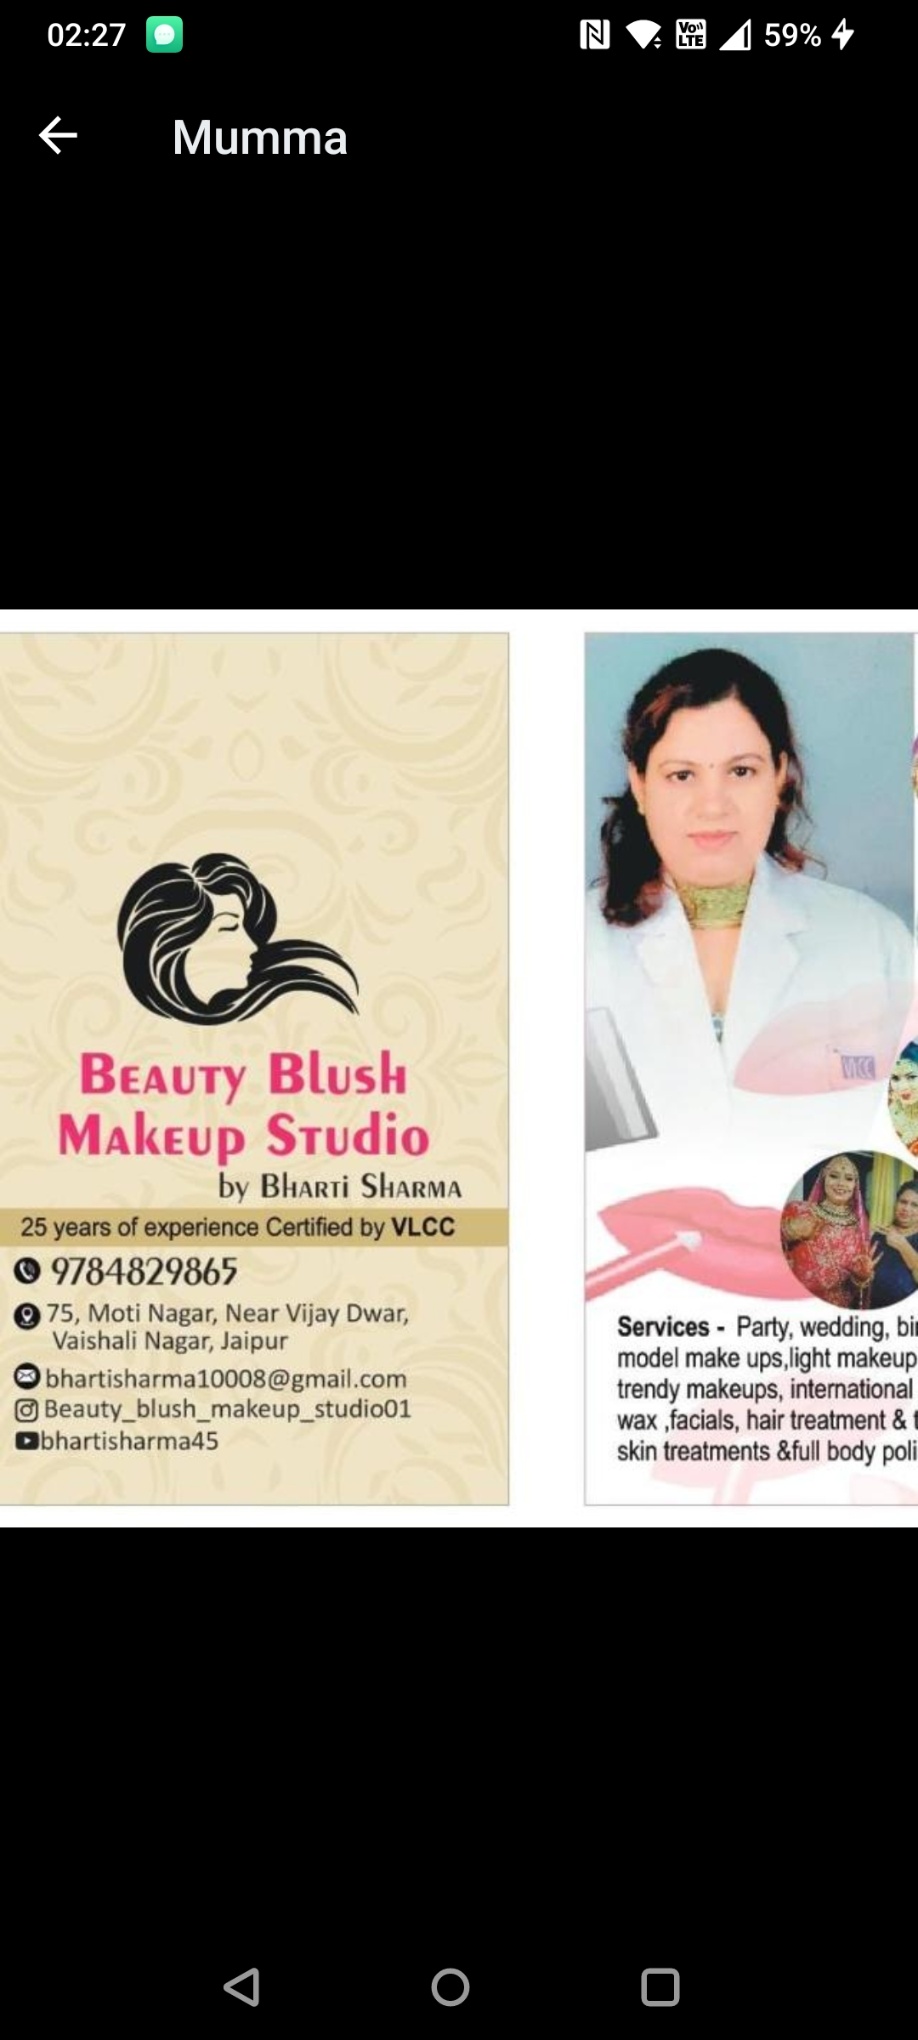 Other Health/ Beauty services, Salons/ Spas; Exp: More than 15 year